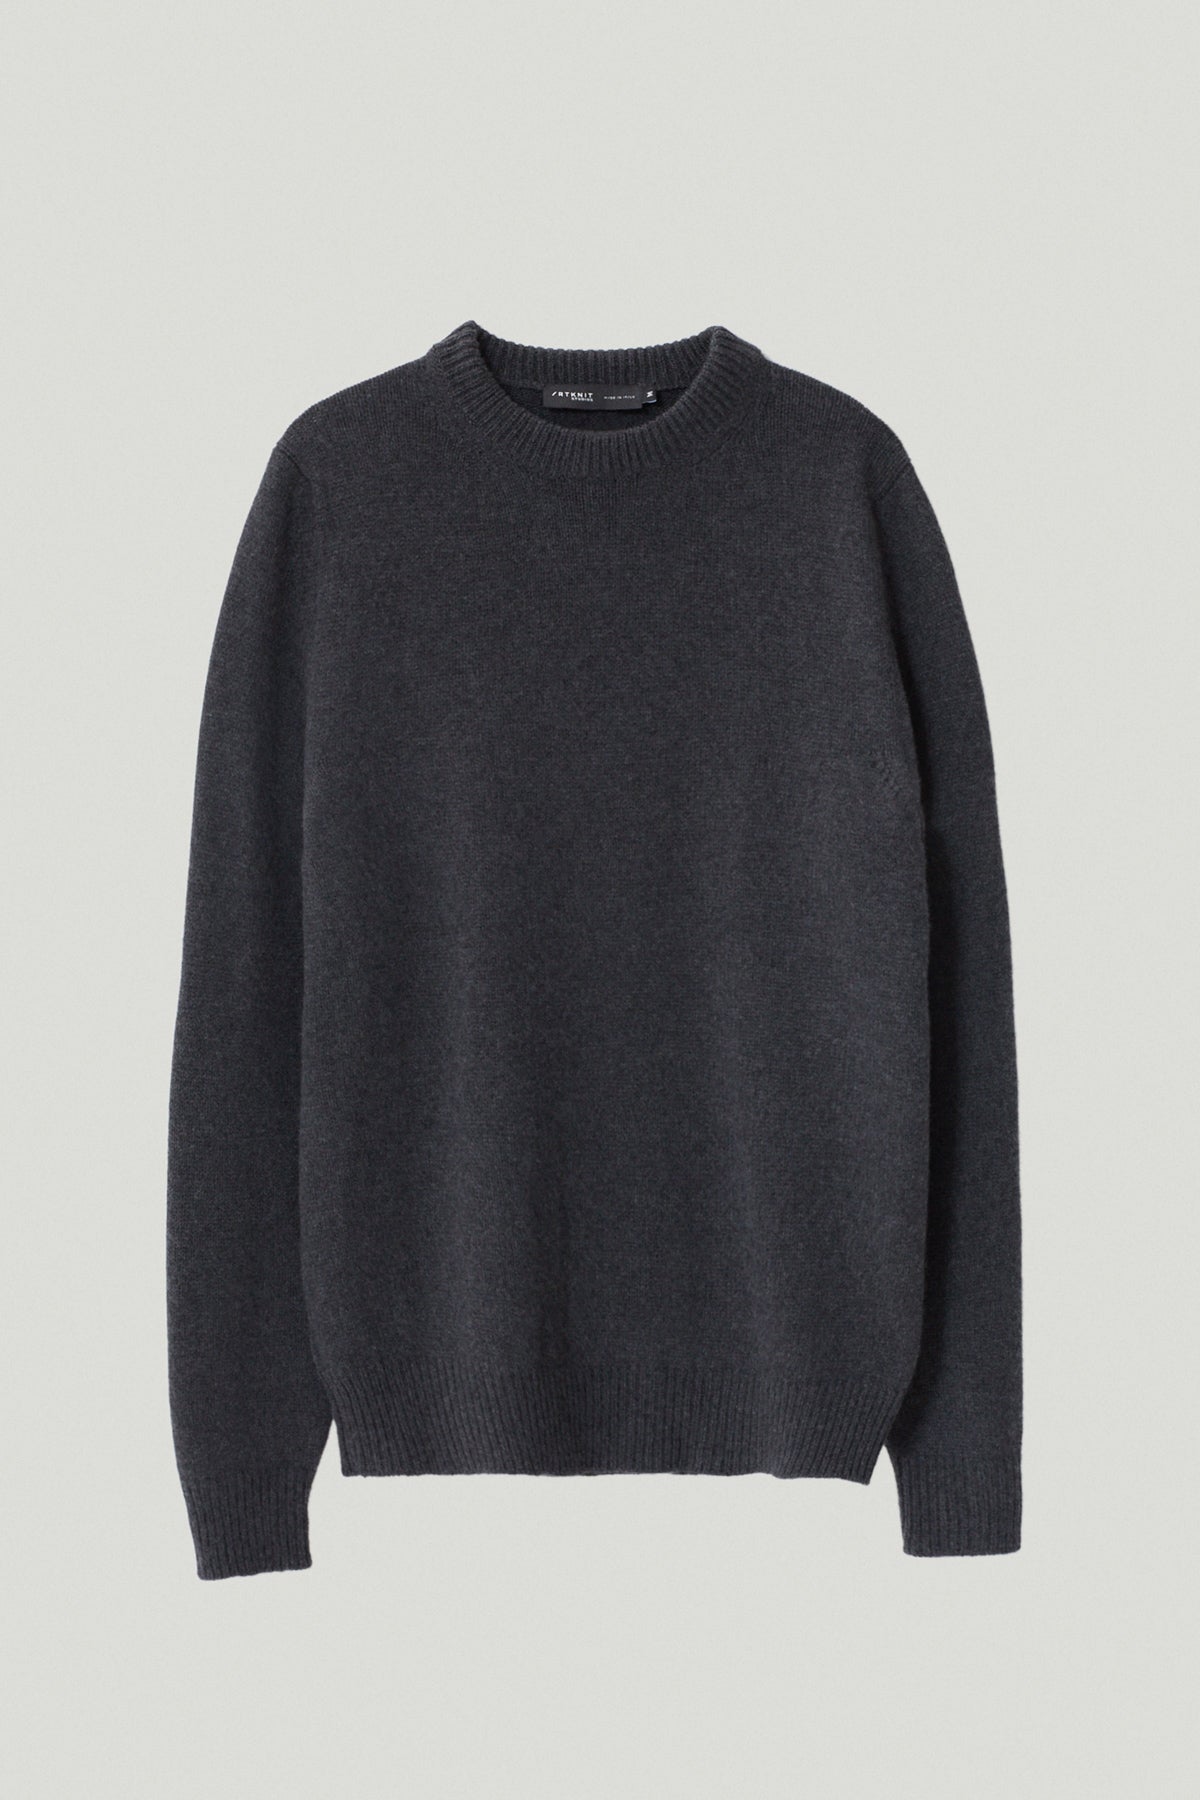 Charcoal Grey | The Superior Cashmere Sweater